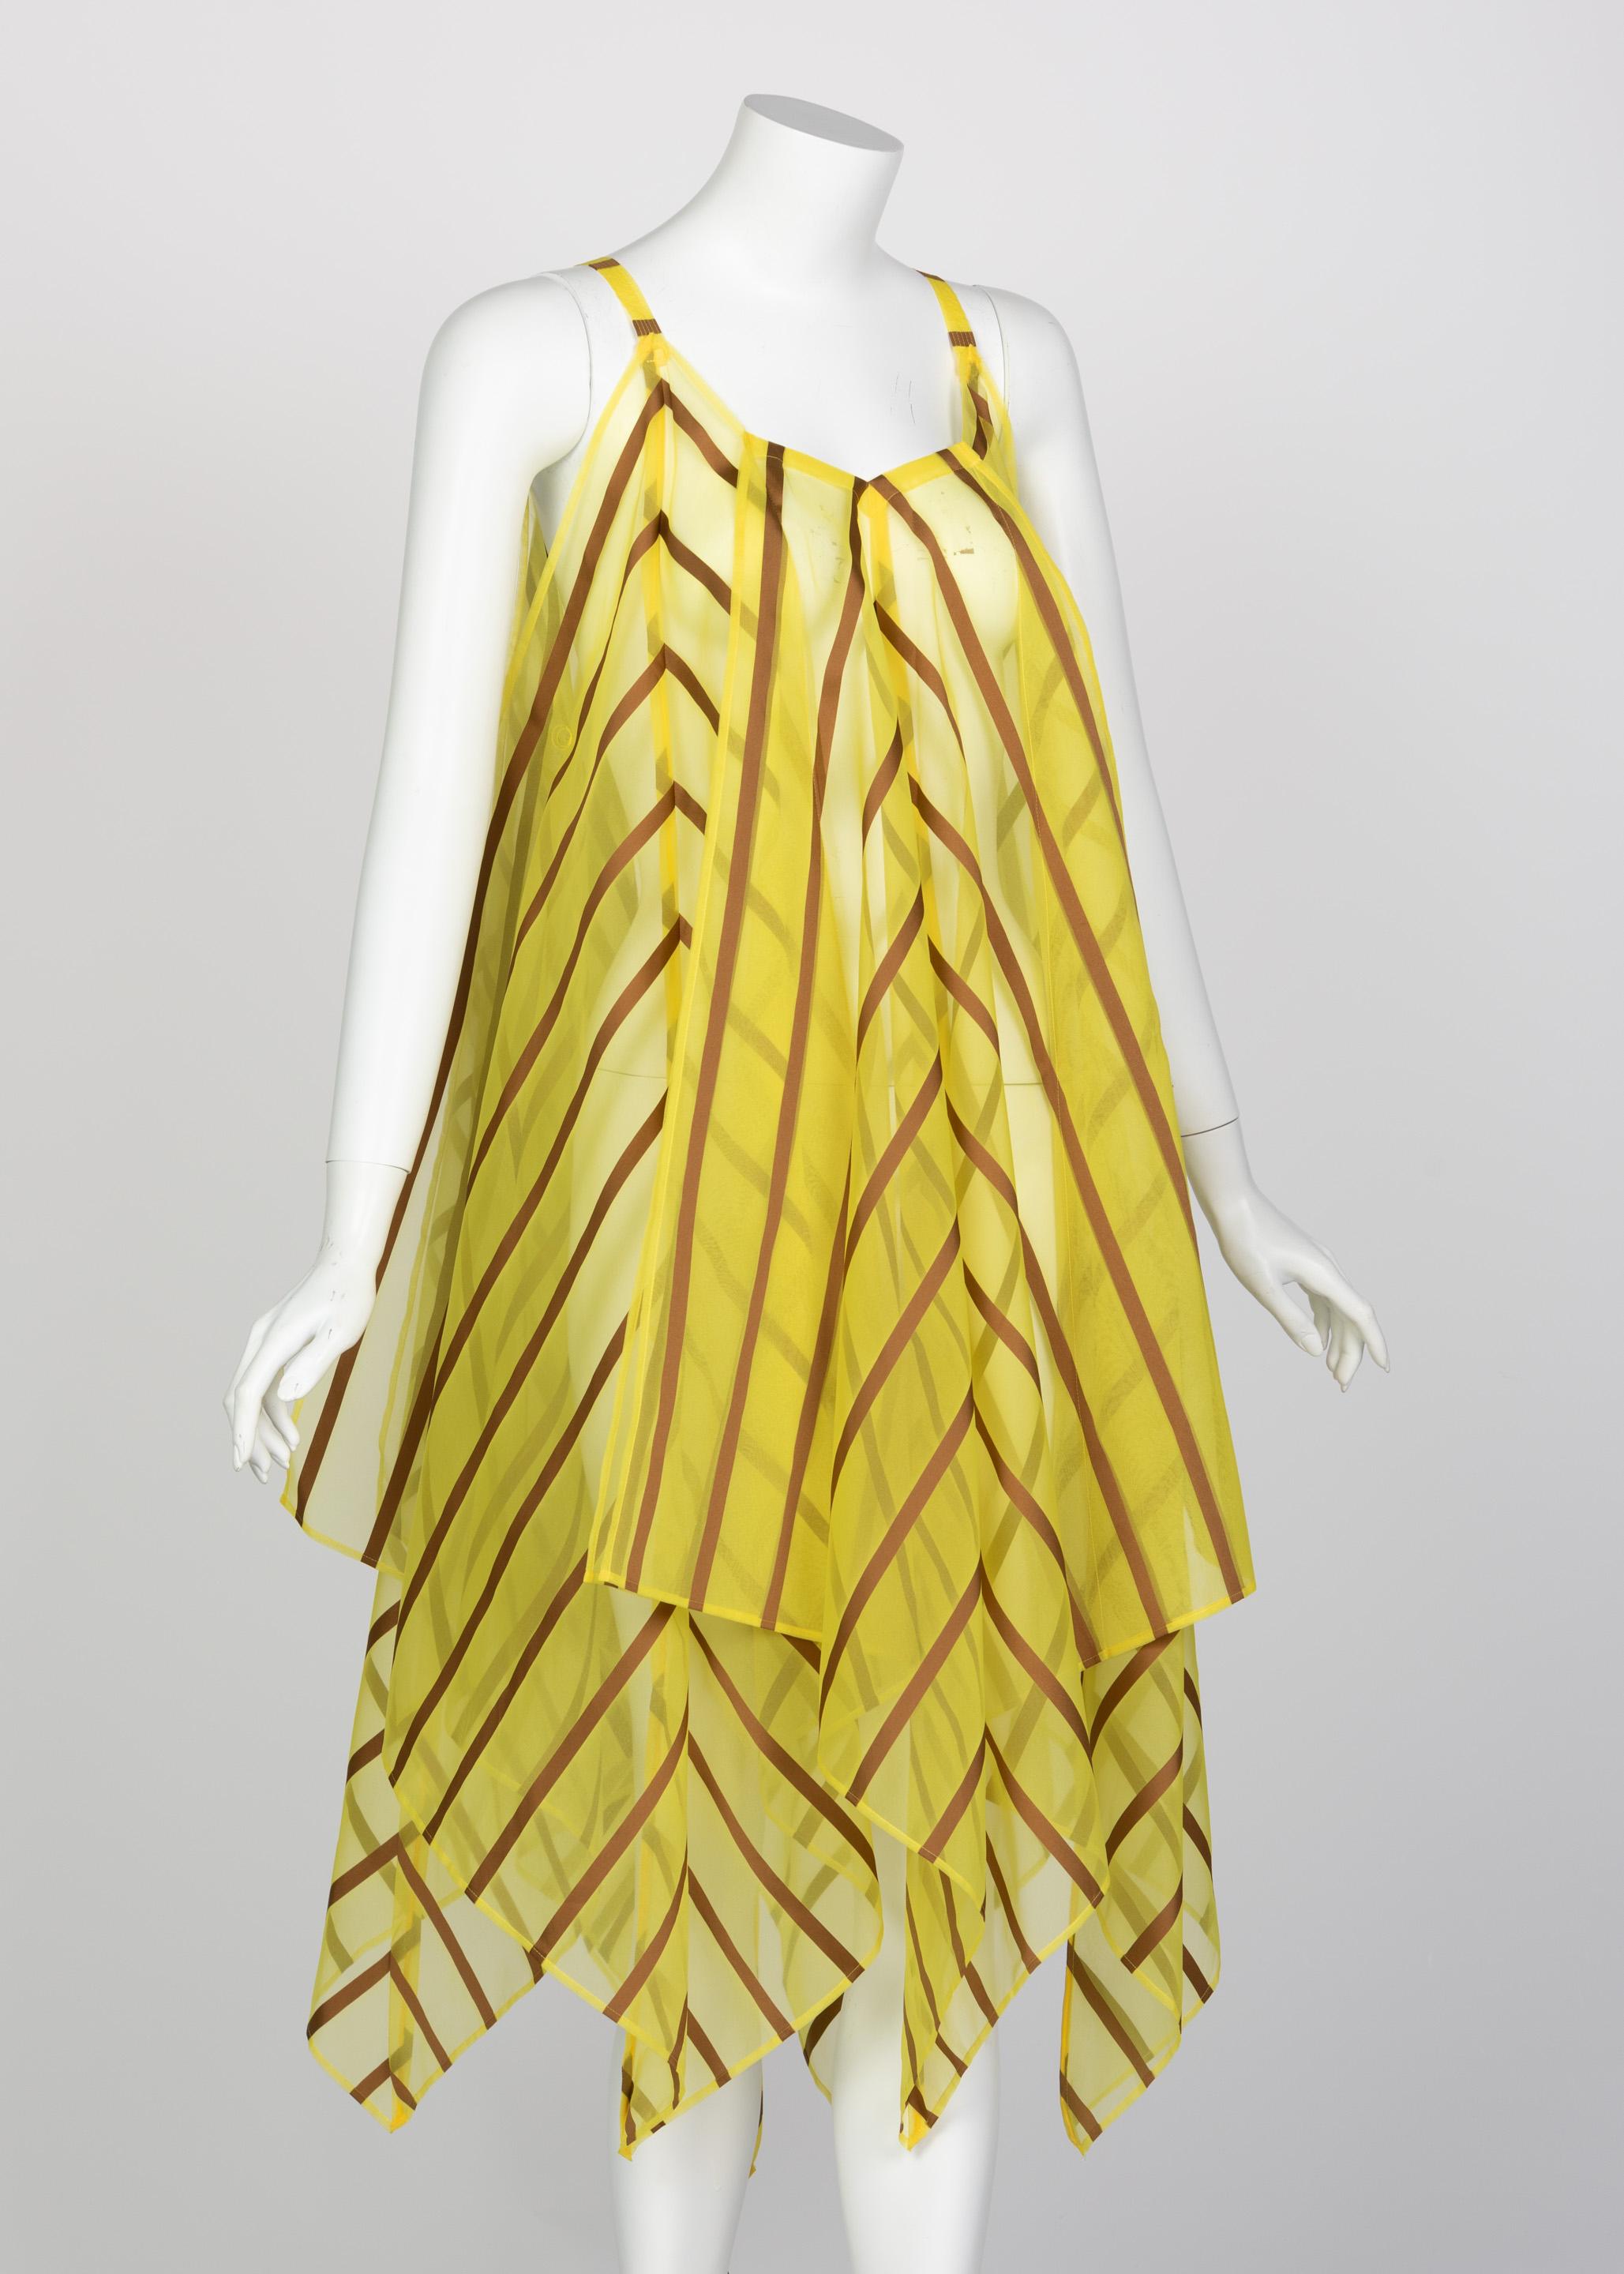 Issey Miyake Yellow Organza Brown Striped Handkerchief Dress In Excellent Condition For Sale In Boca Raton, FL